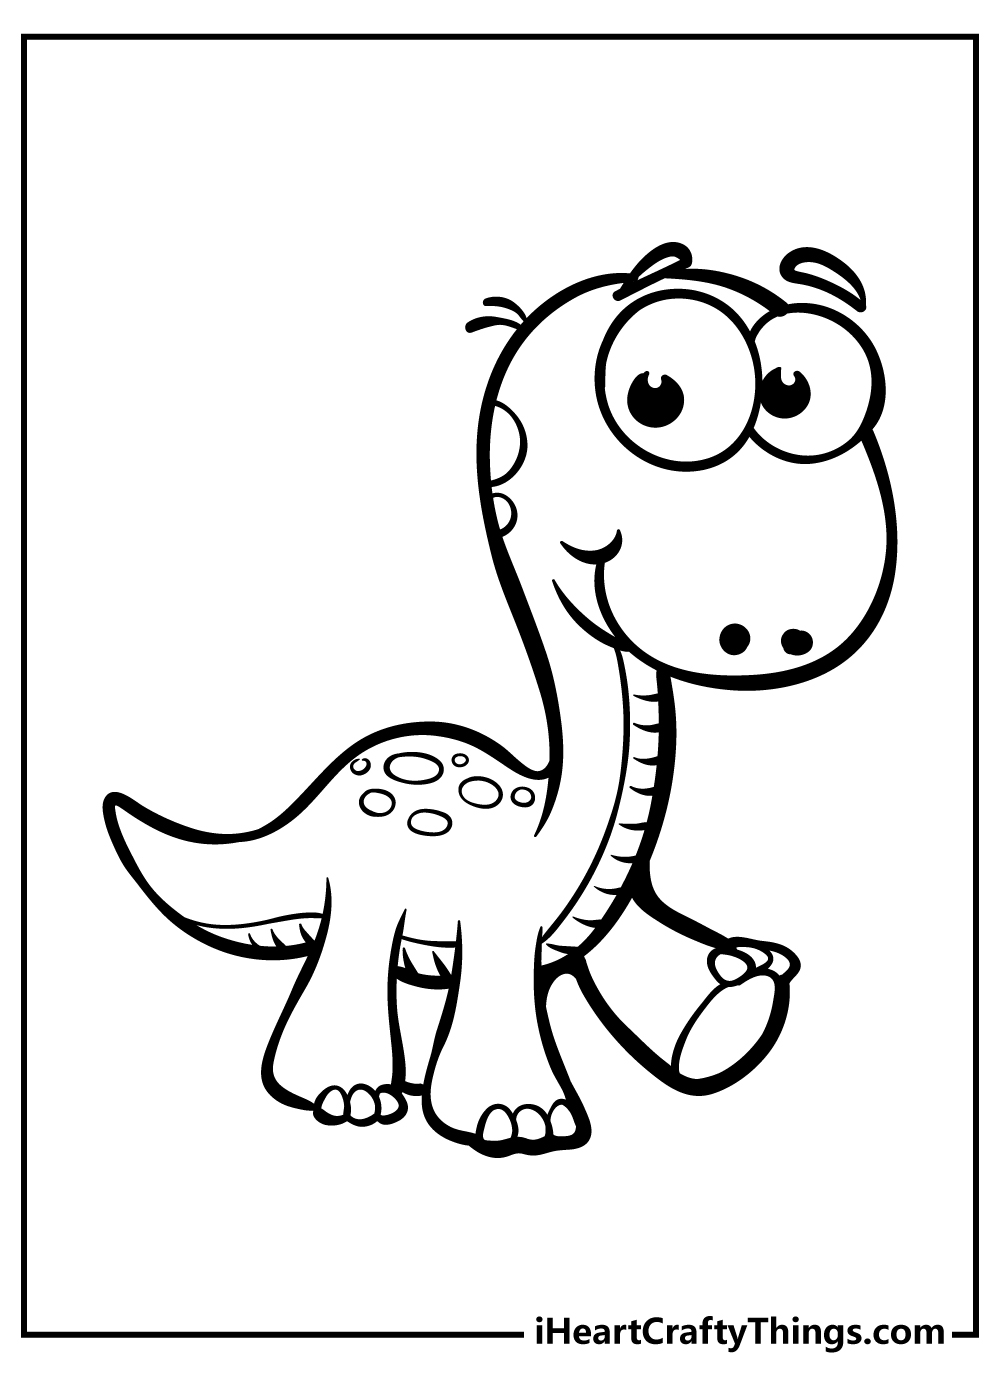 Baby Dinosaur Coloring Pages free pdf download